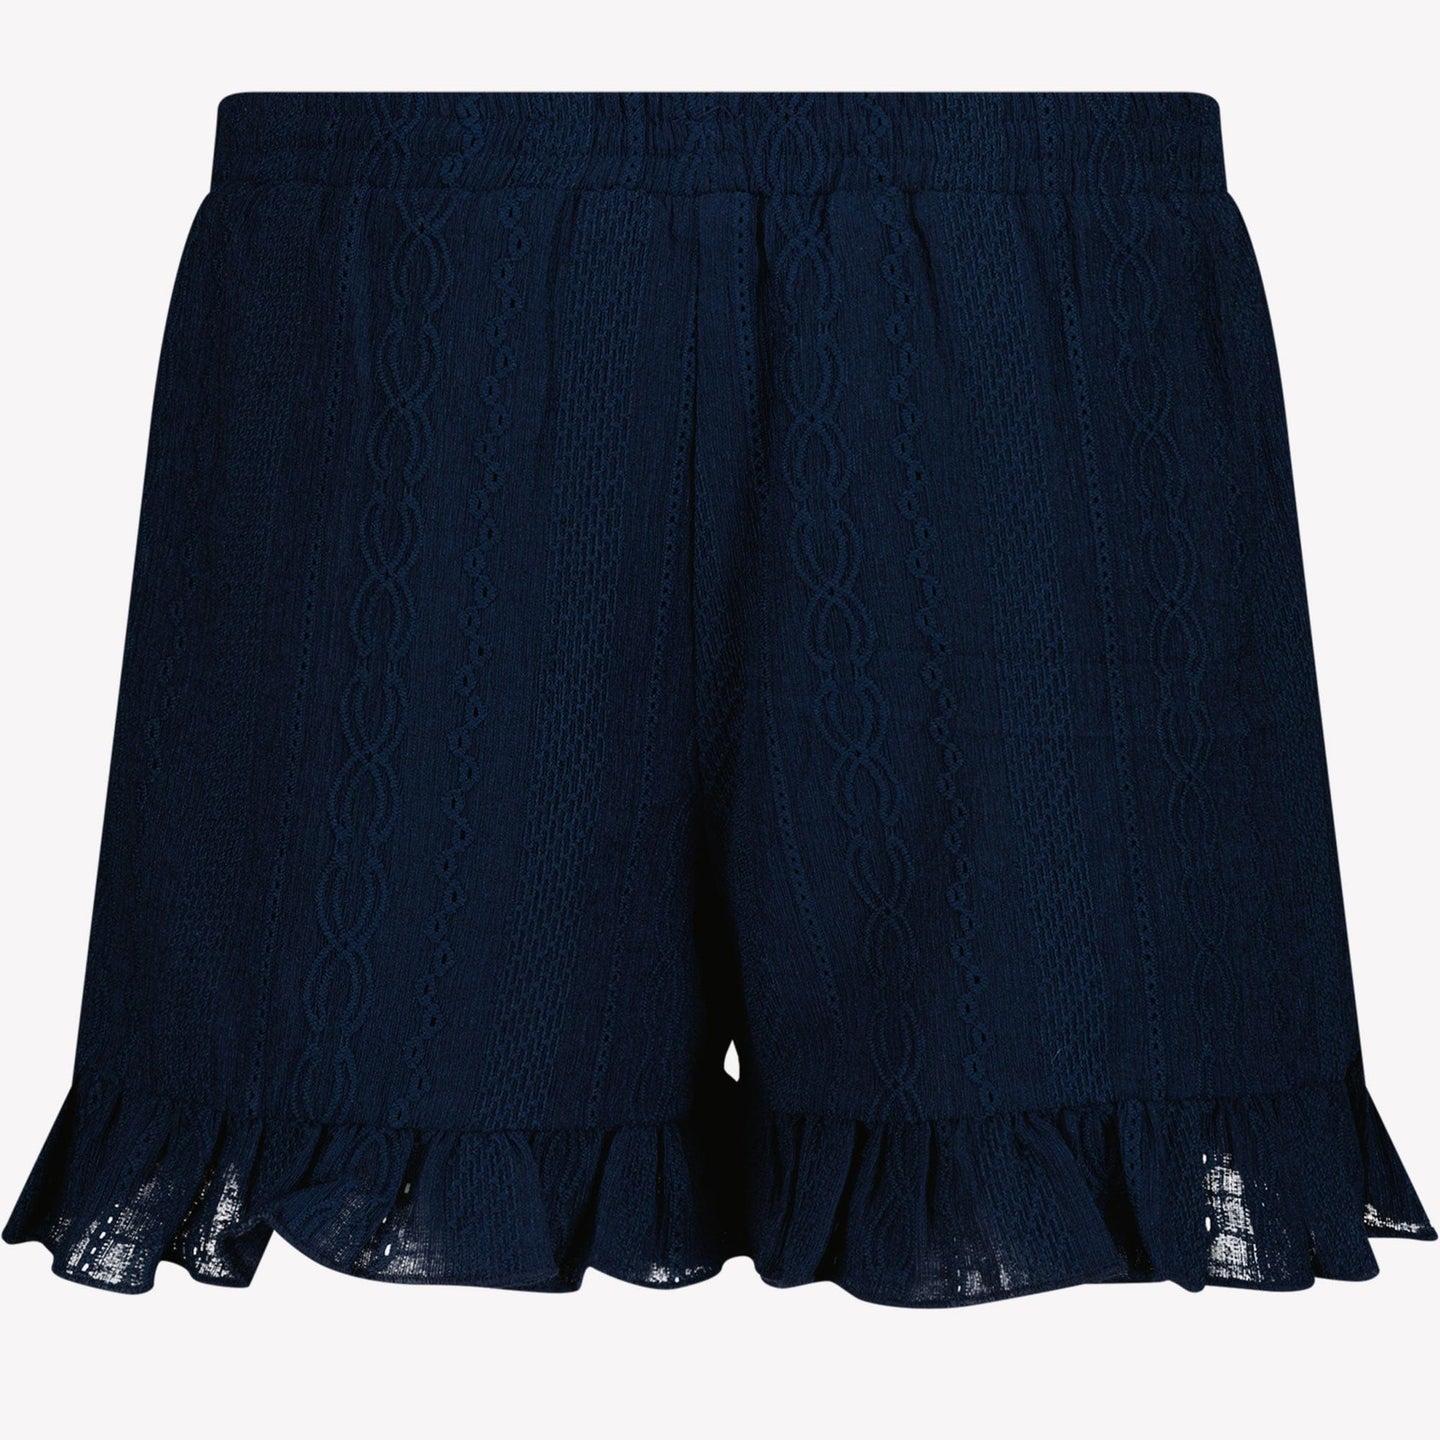 Guess Baby Meisjes Shorts Navy 12